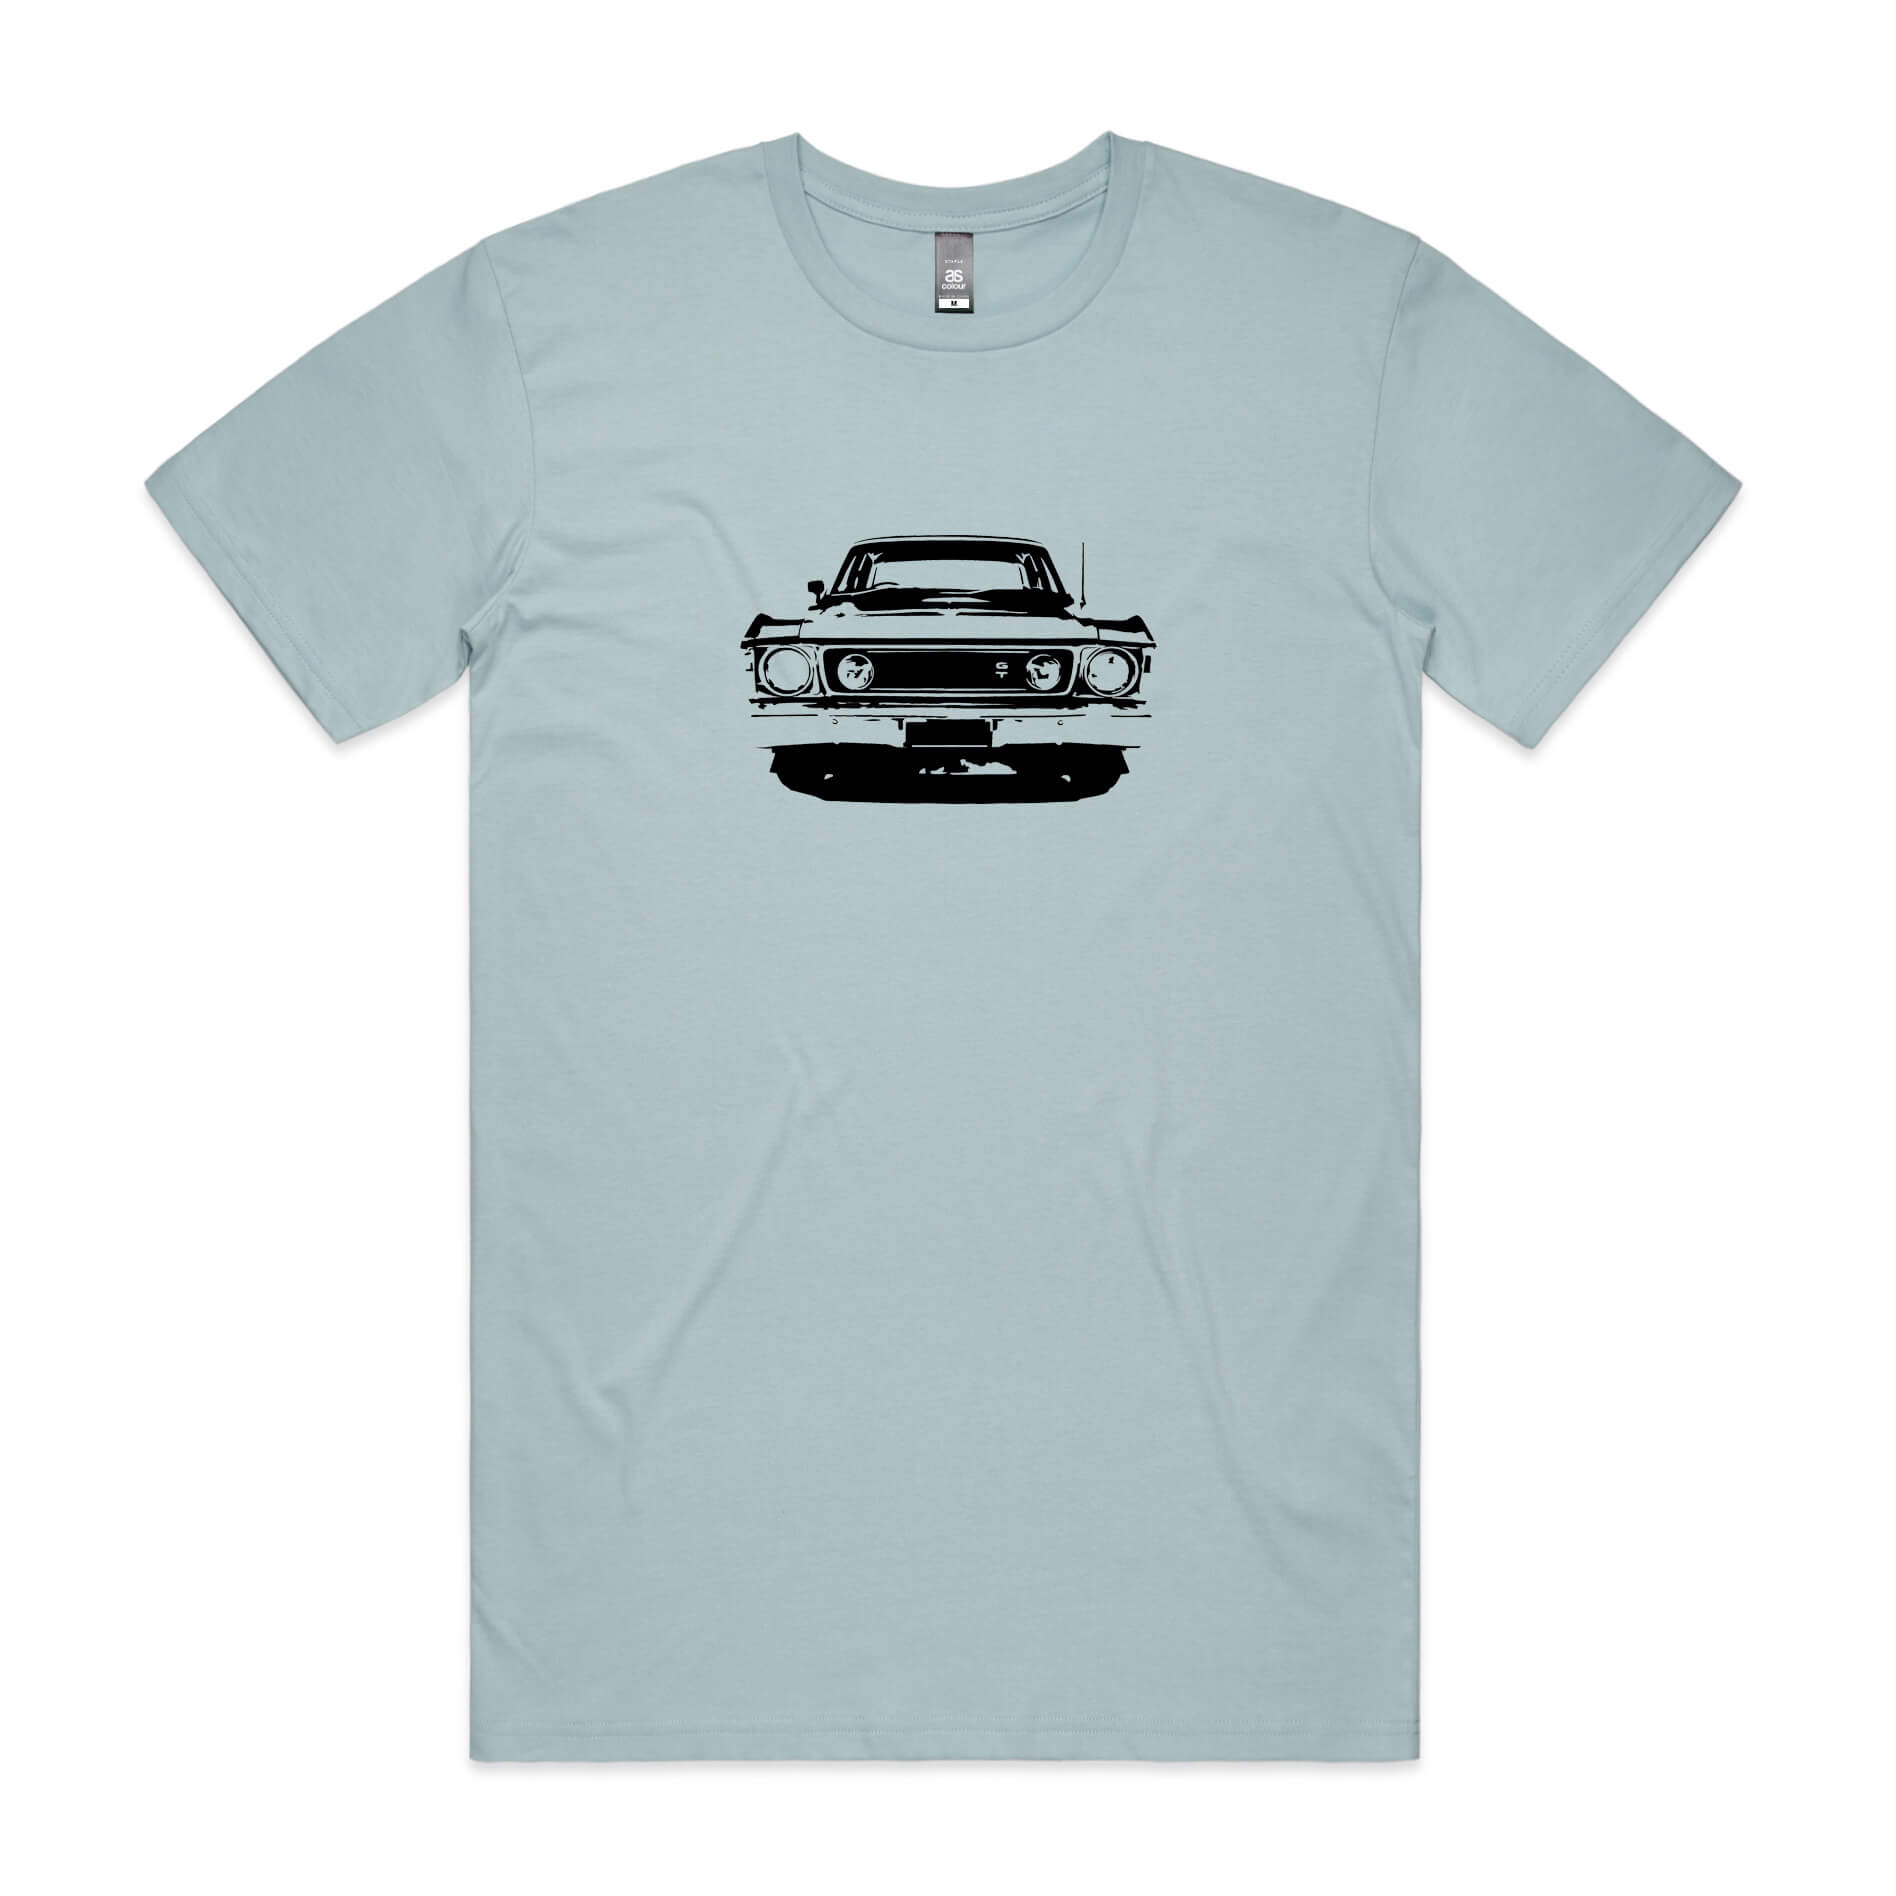 Ford XW Falcon t-shirt in light blue with black GT car graphic